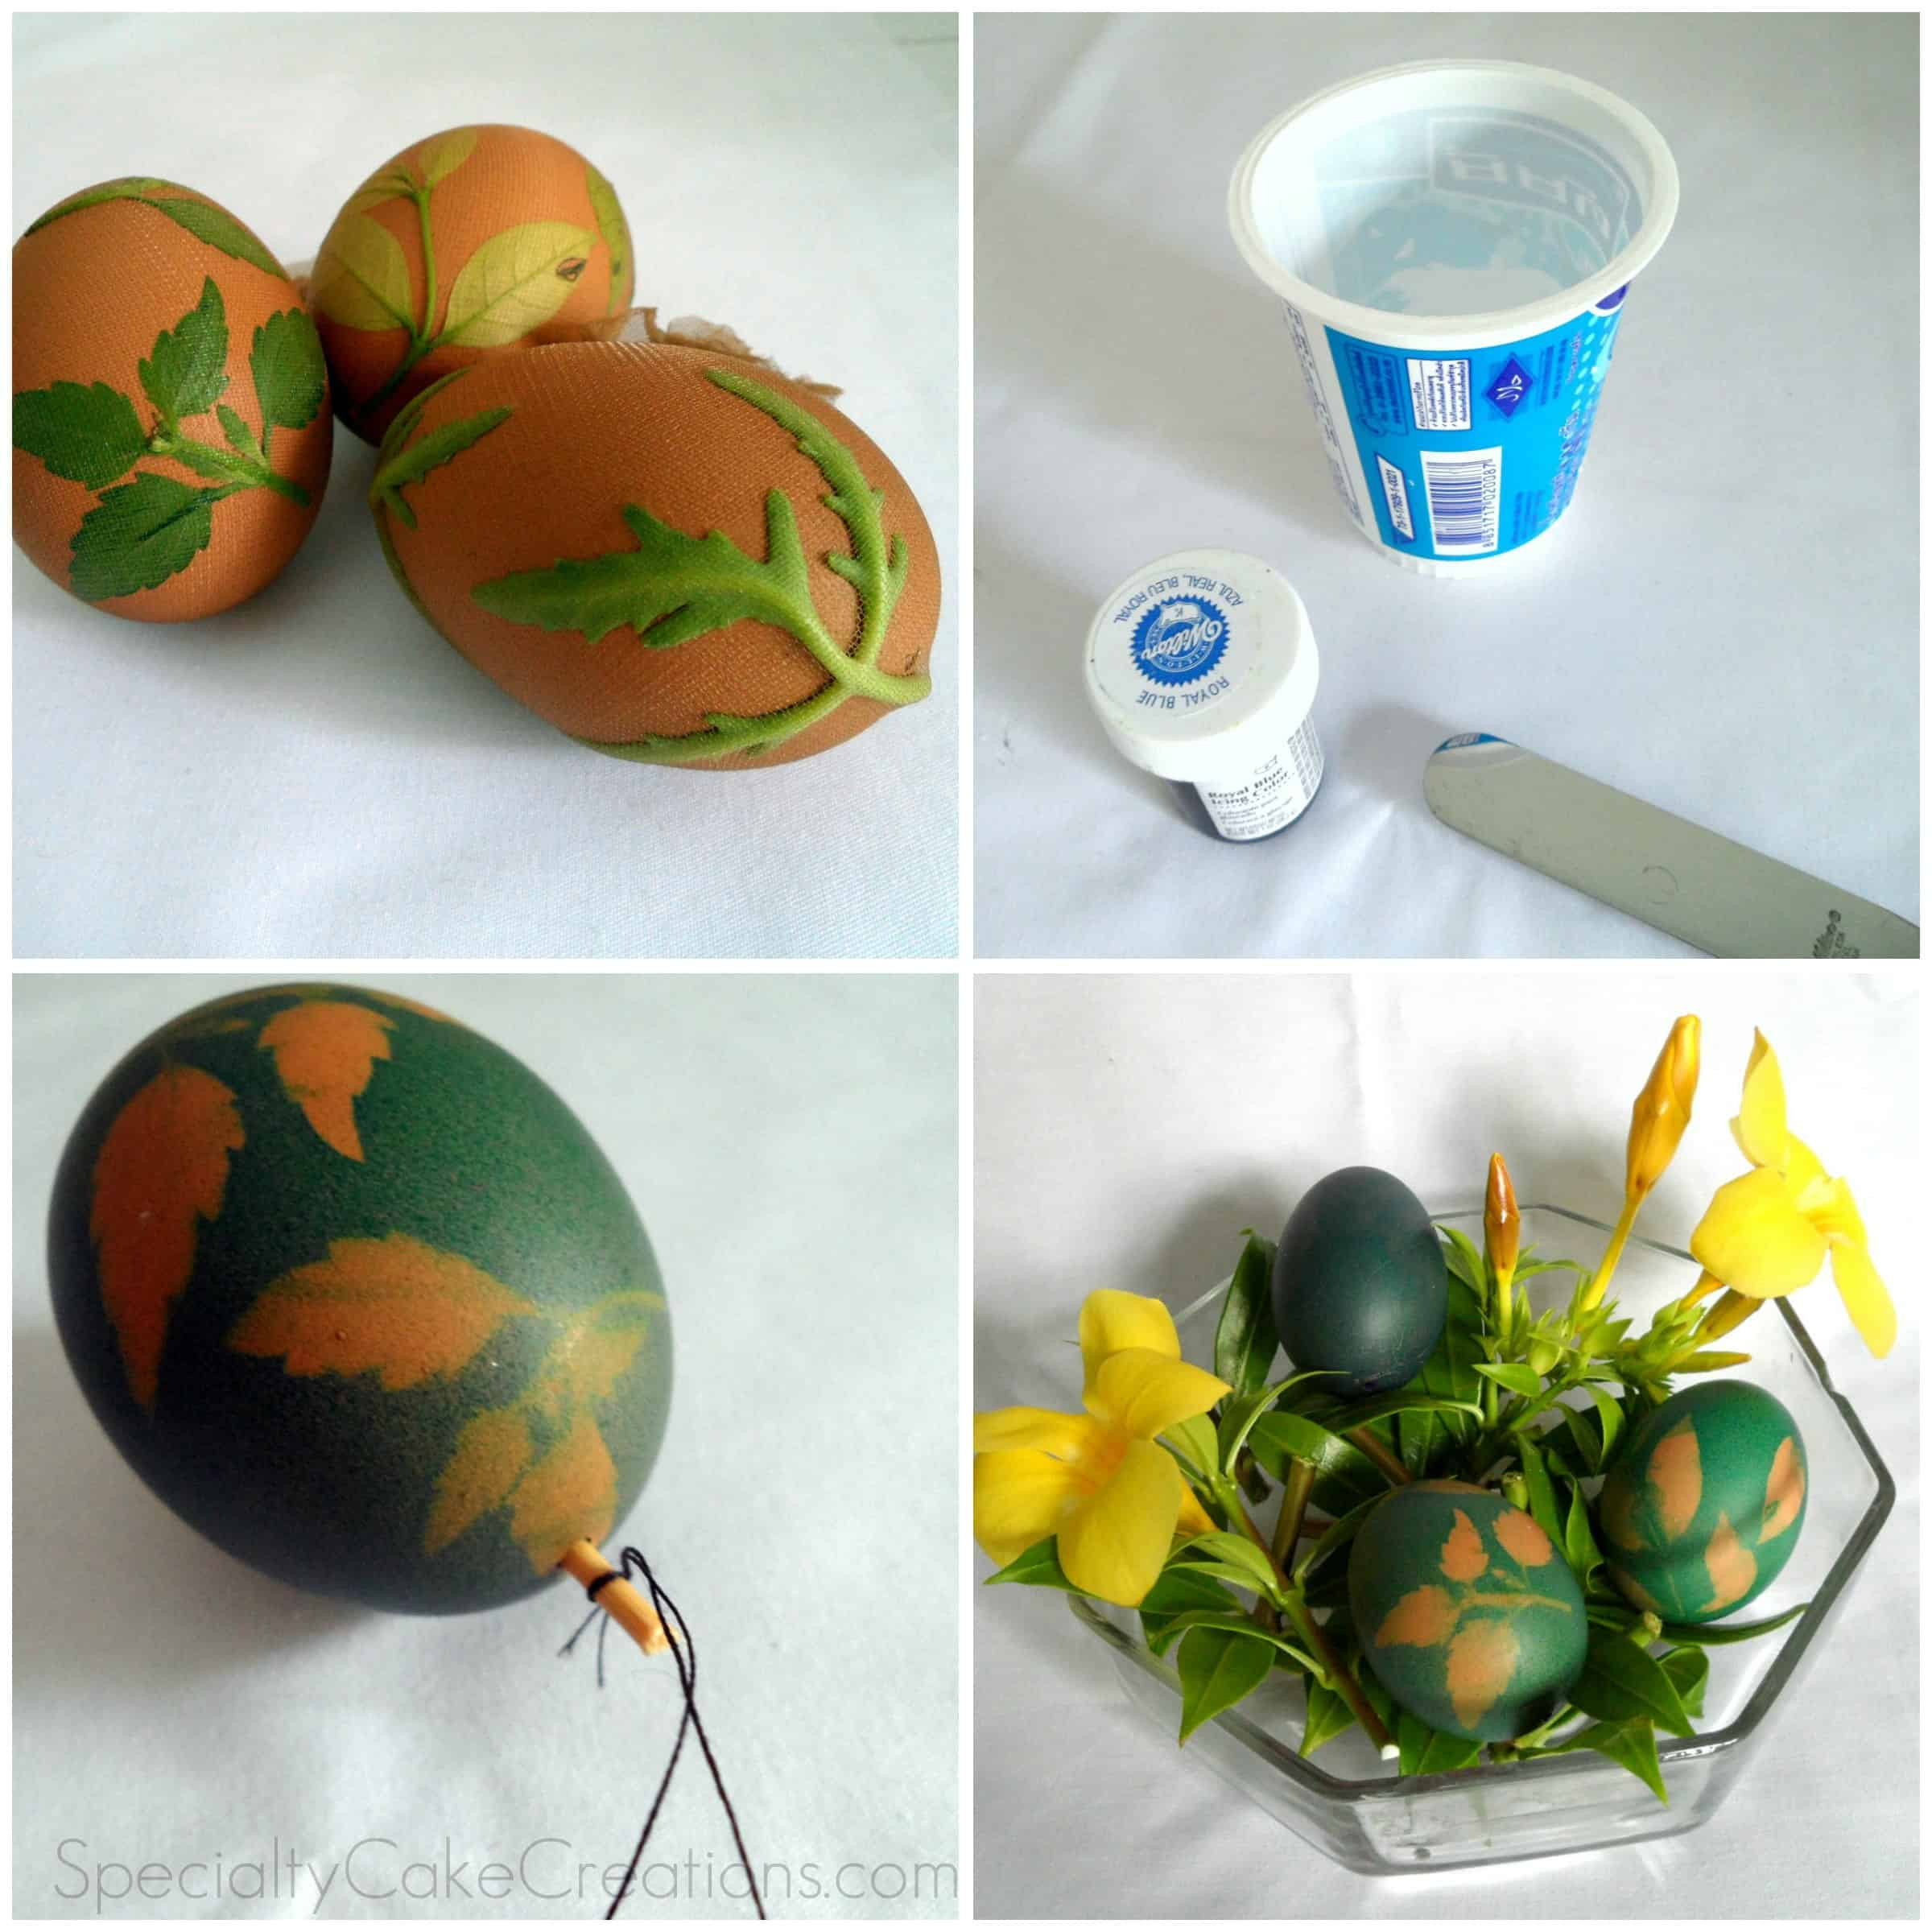 Coloring Easter Eggs With Food Coloring
 Leaf Print Easter Eggs with Food Coloring